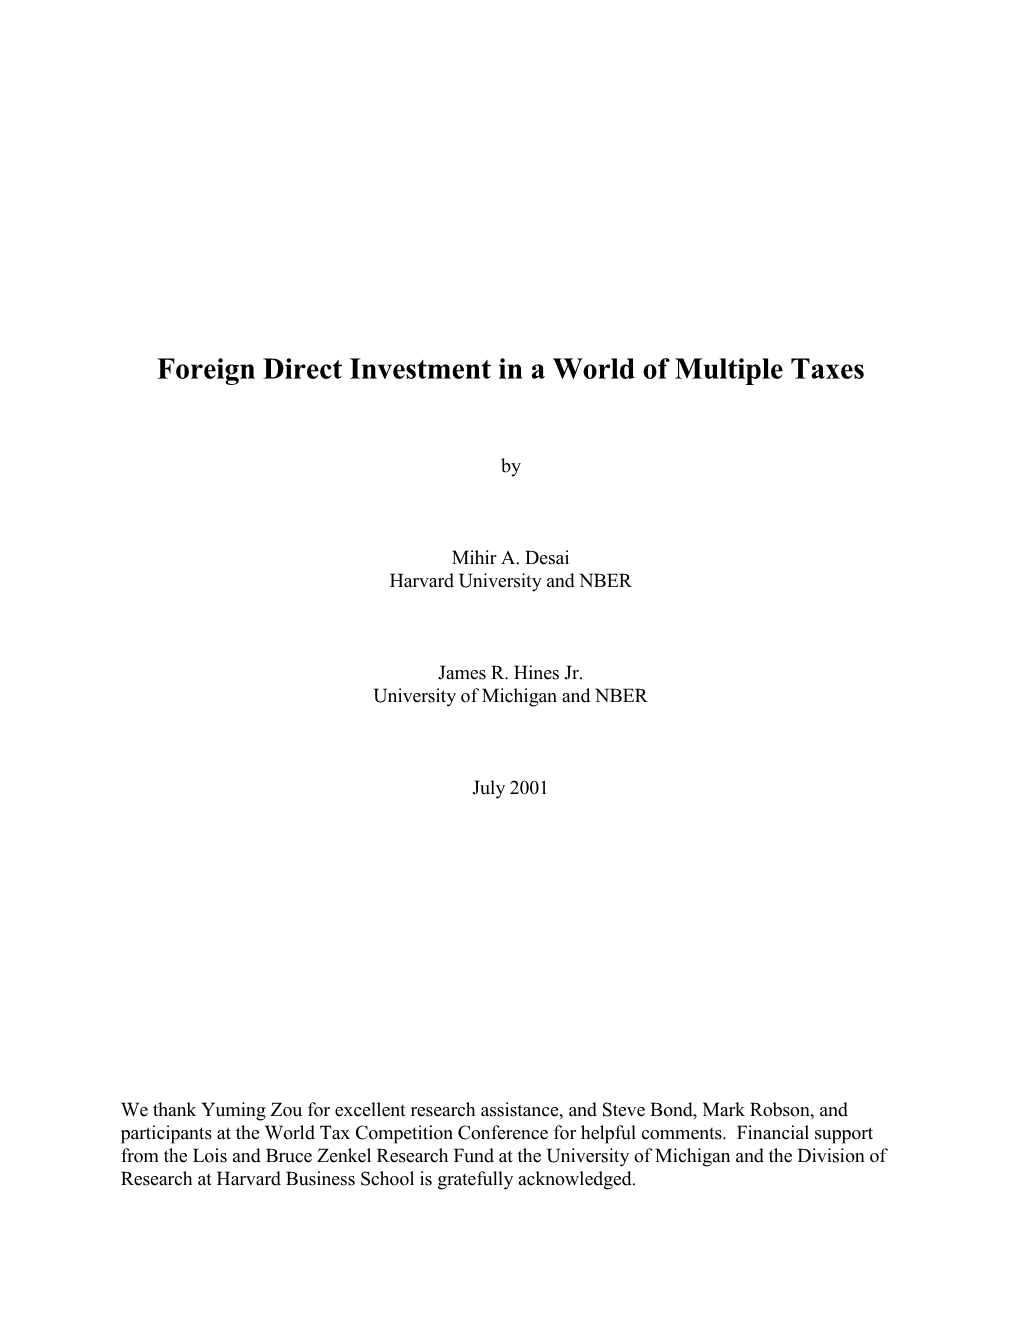 Foreign Direct Investment in a World of Multiple Taxes